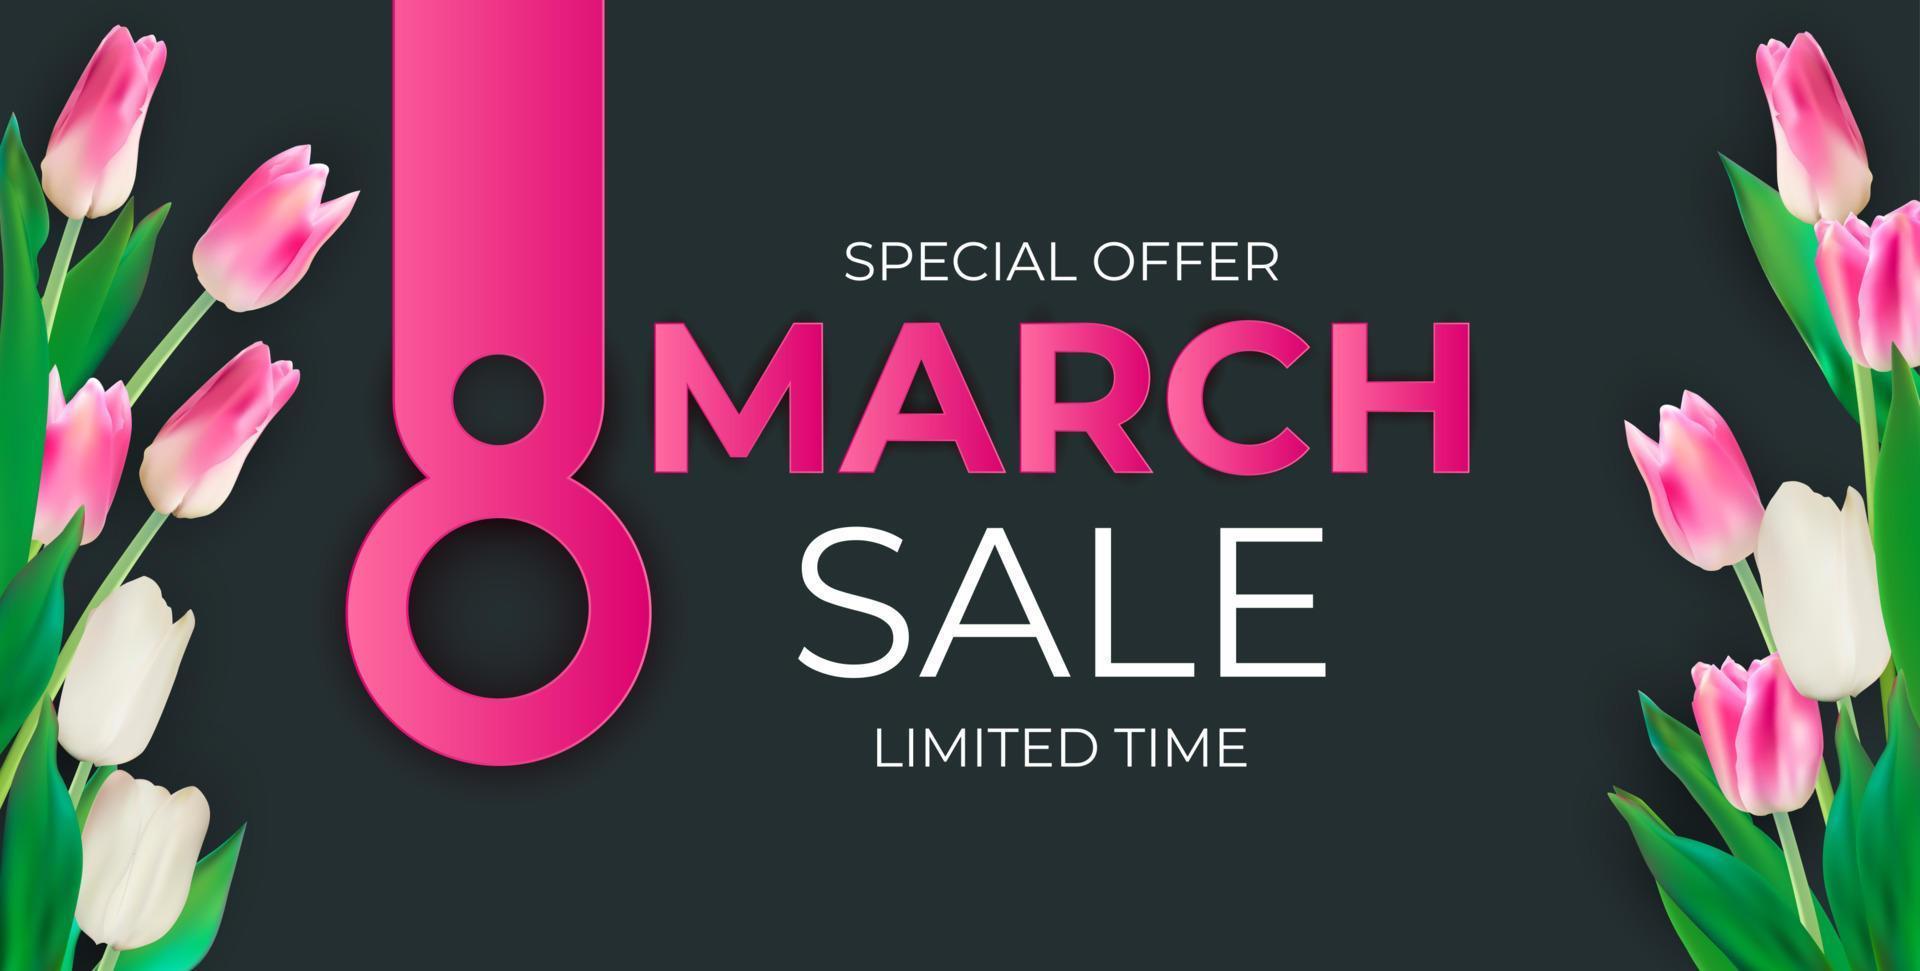 8 March sale banner Background Design. Template for advertising, web, social media and fashion ads. Poster, flyer, greeting card, header for website Vector Illustration. EPS10